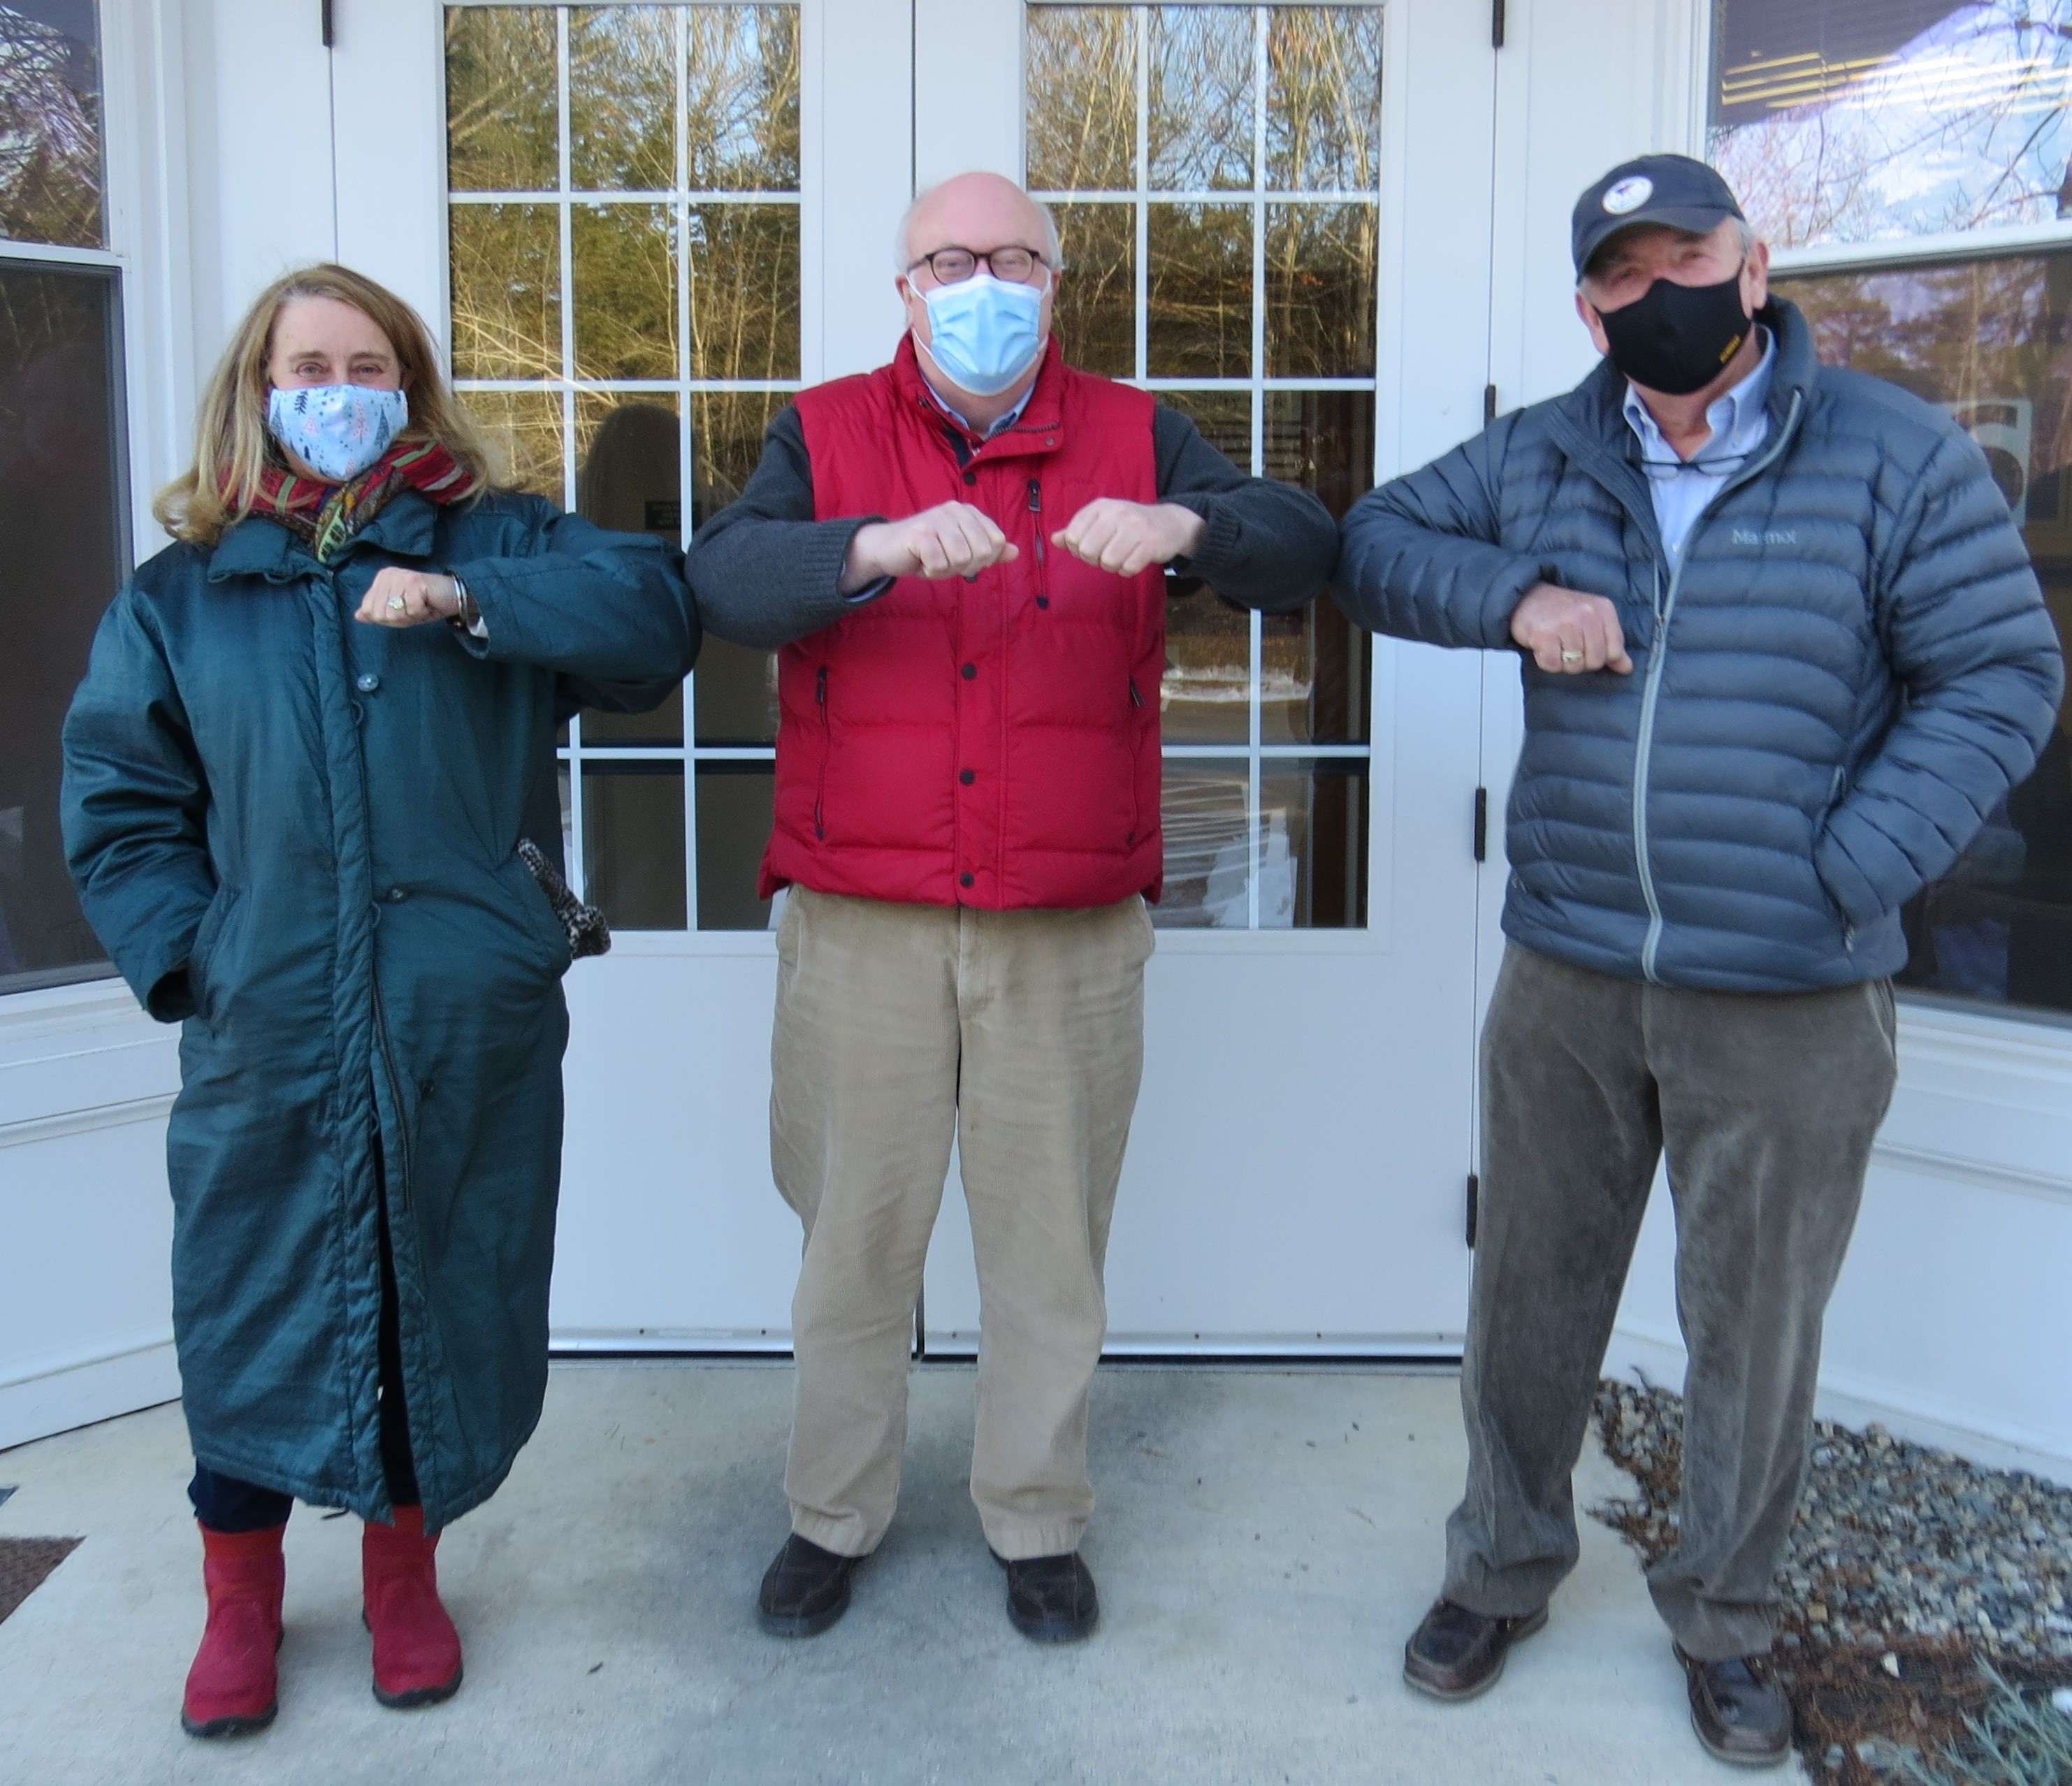 A woman and two men stand in front of a door wearing face coverings and winter clothing doing elbow bumps for the camera